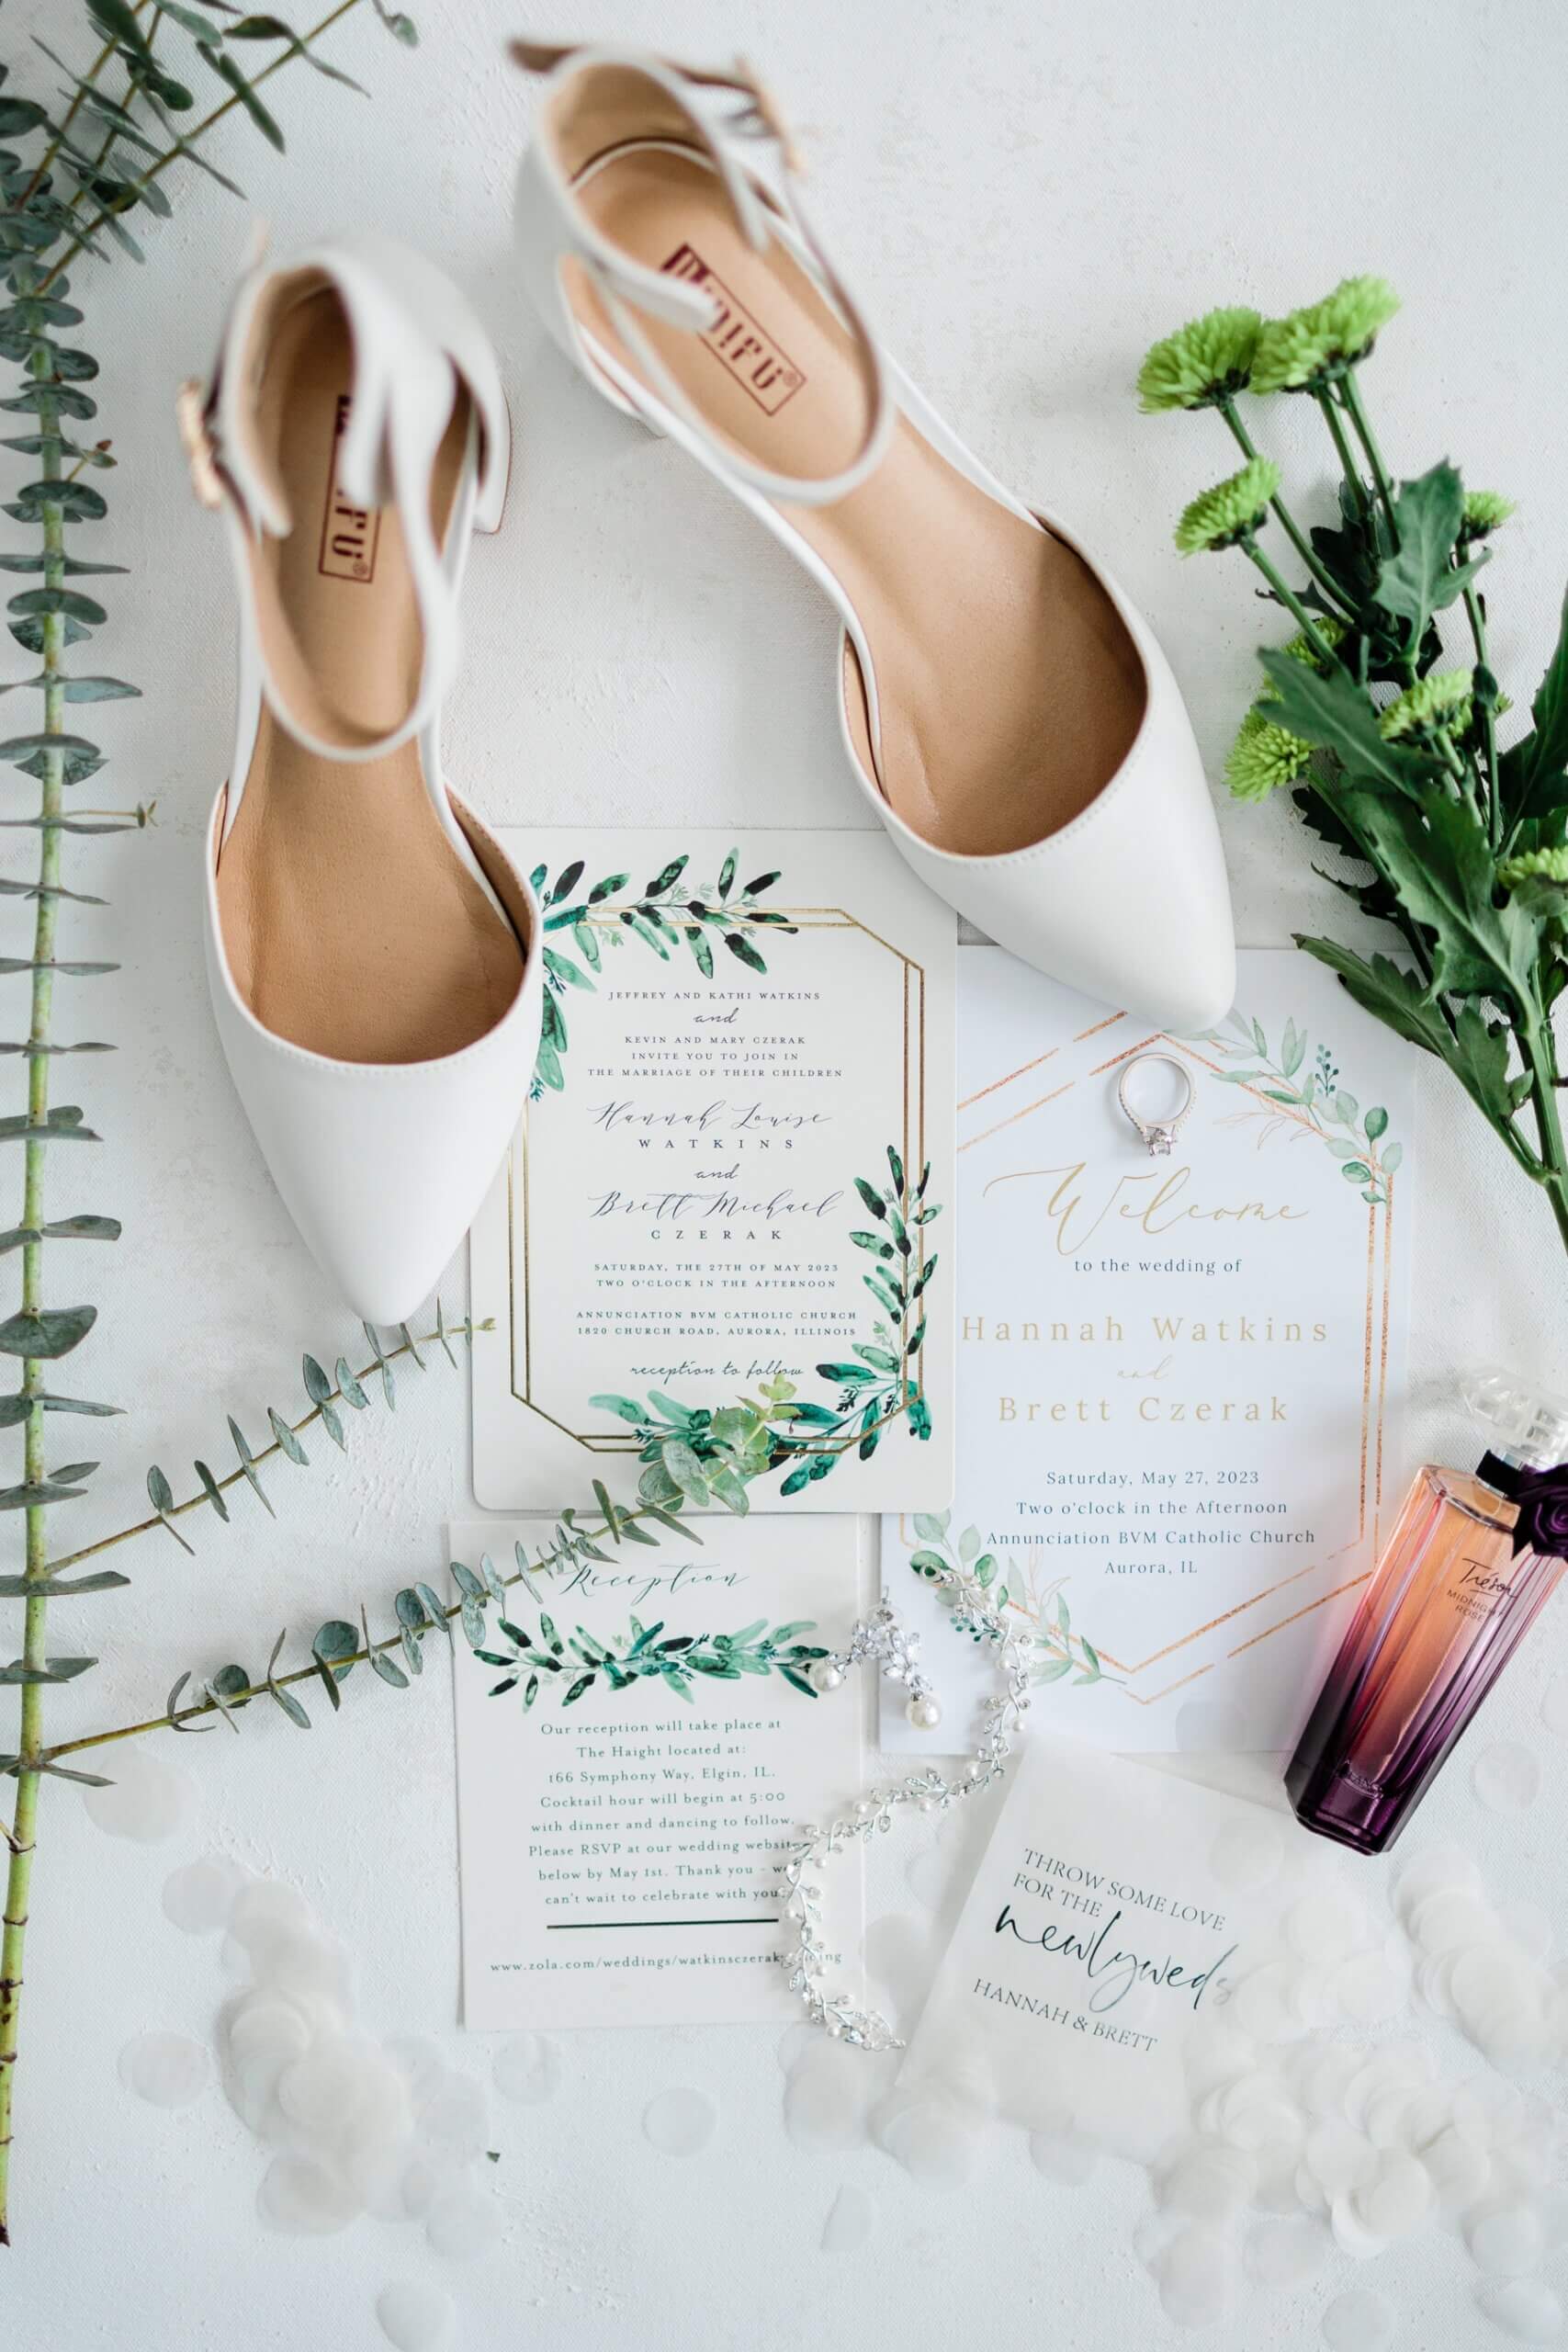 White wedding invitation with white shoes and greenery